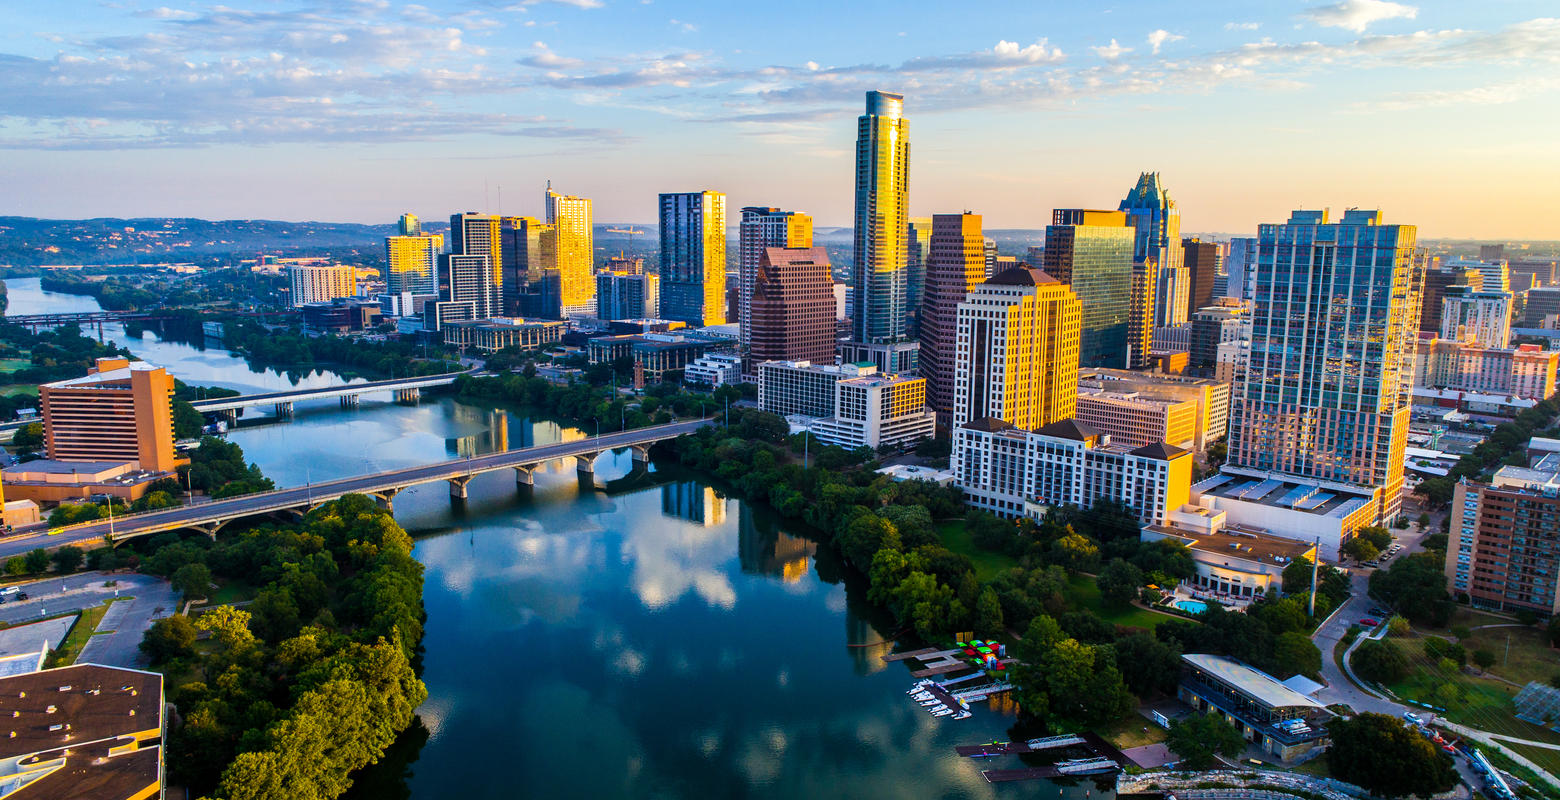 For a piece on where to stay in Austin, a shot of the city skyline at dawn